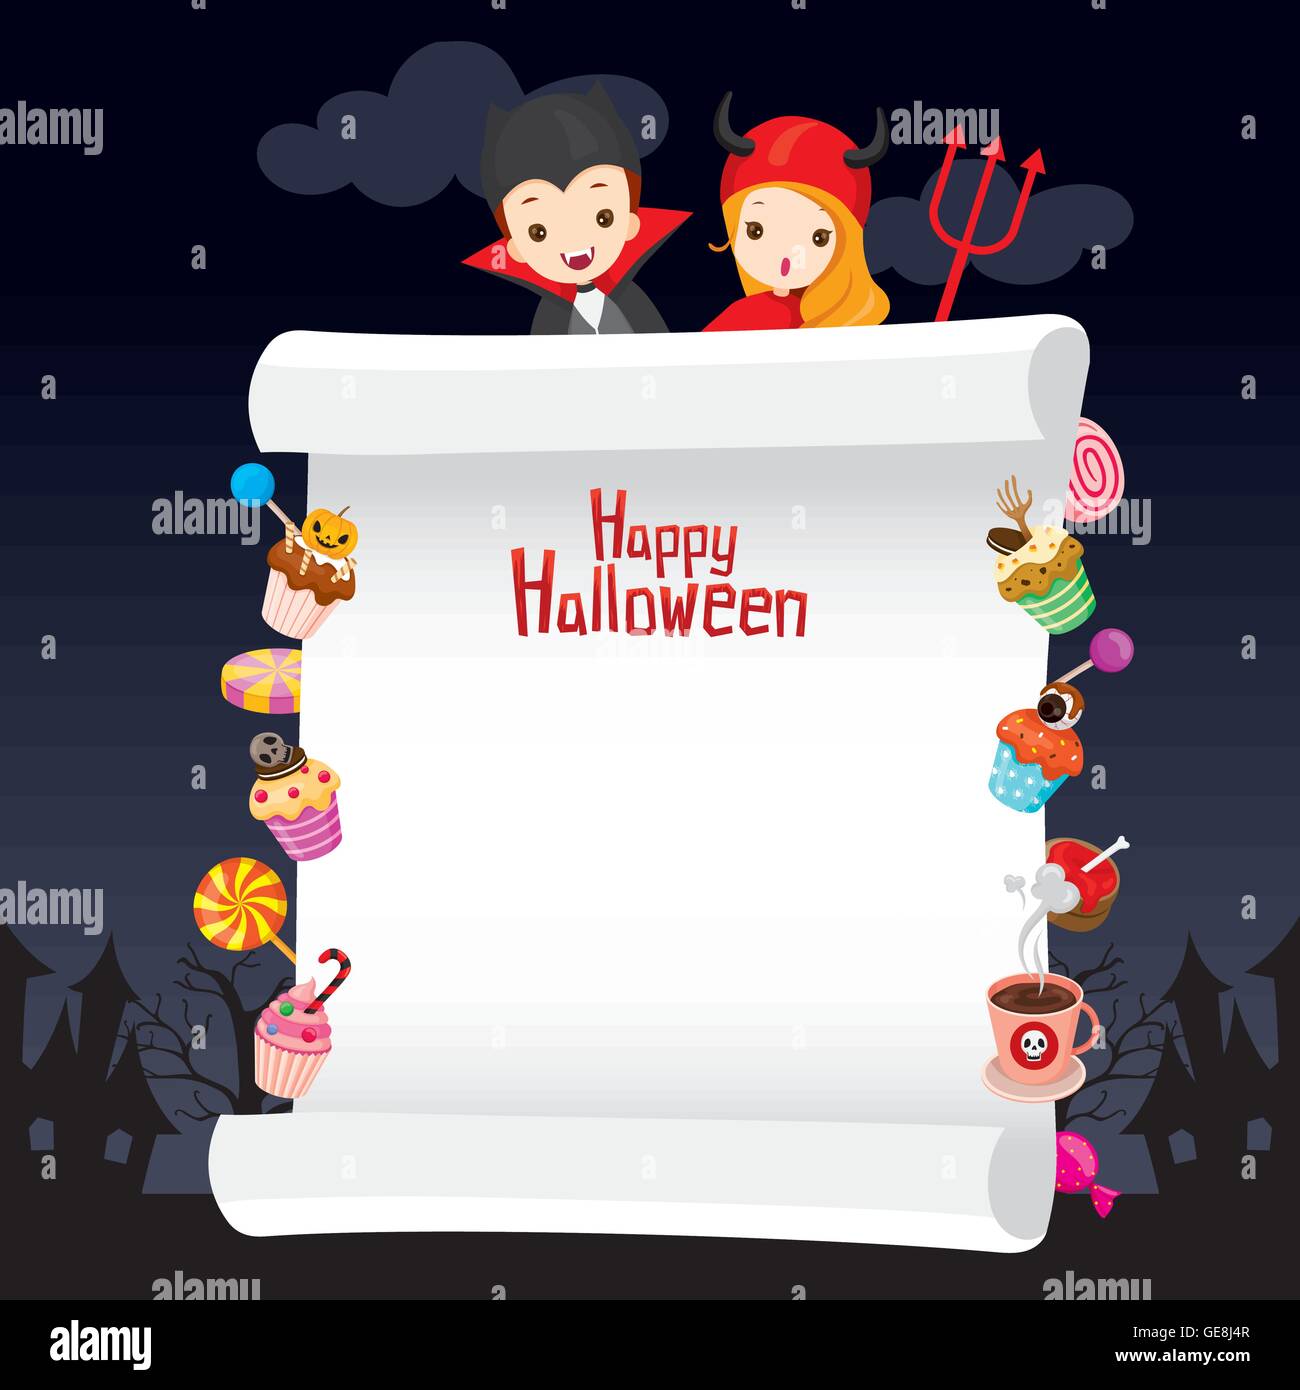 Children in Halloween Costume with Dessert on Banner, Holiday, Culture, Disguise, Ornate, Fantasy, Night Party Stock Vector